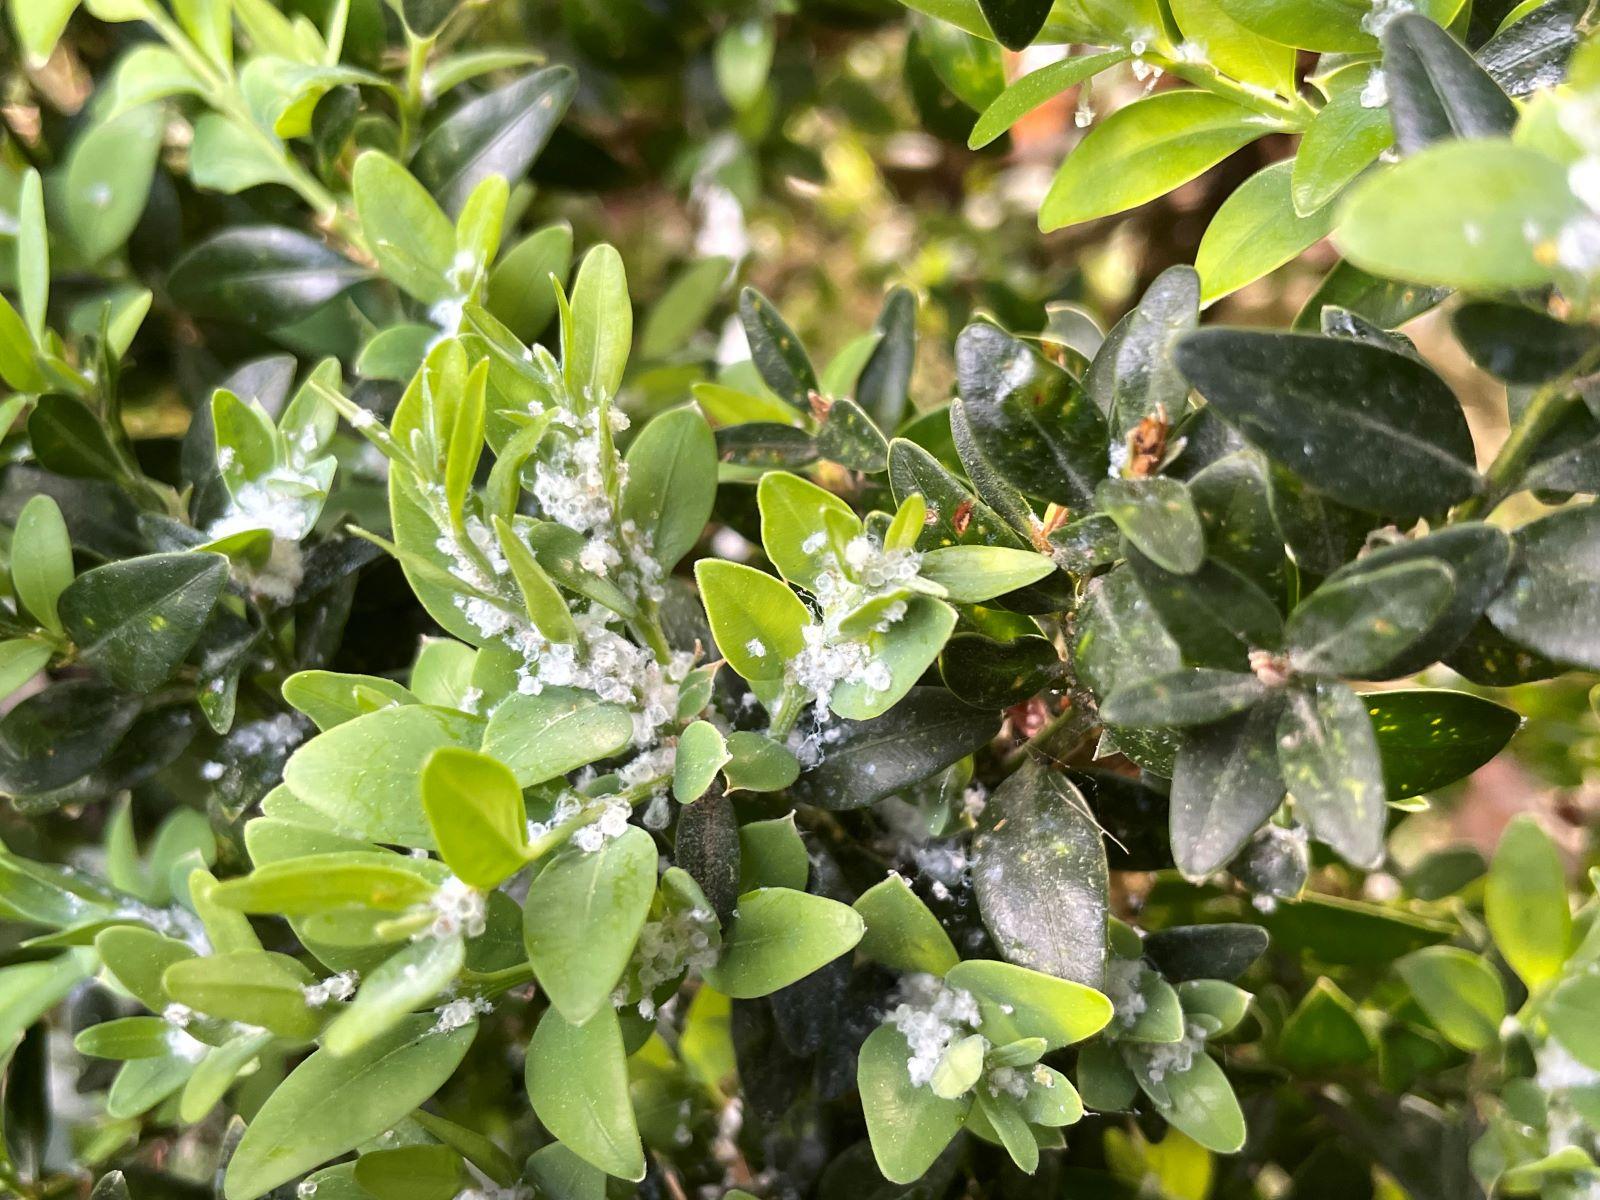 white fluffy wax material on boxwood shrub - from boxwood psyllid insects